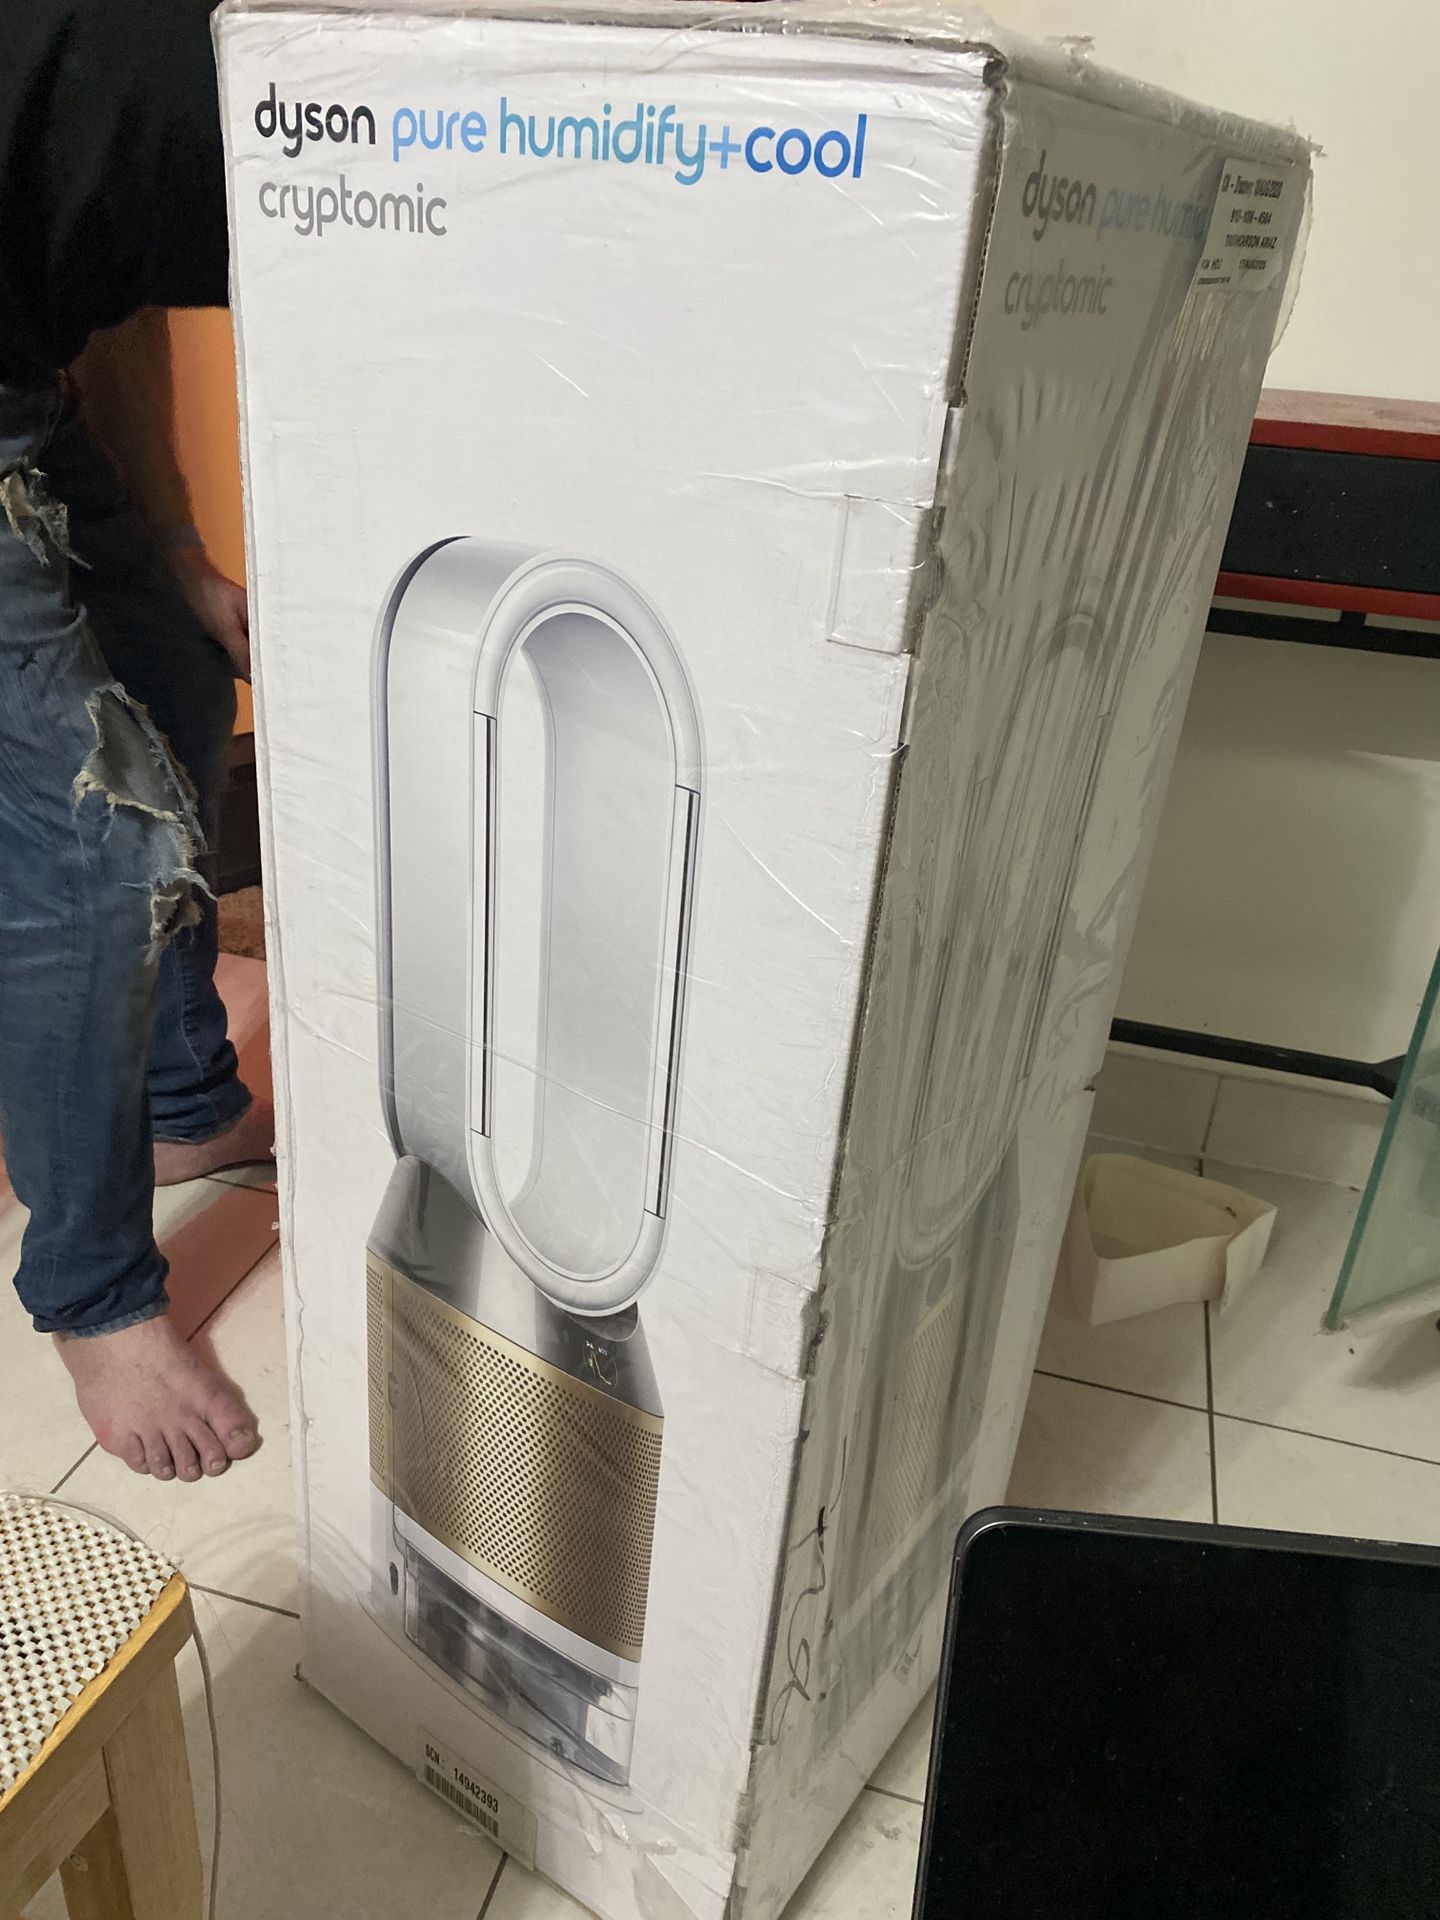 Dyson’s “NEWEST, most POWERFUL CRYPTOMIC PURE HUMIDIFIER!!” DYSON PH02 Pure Humidify + Cool Cryptomic (White/Light Gold) Purifier. Humidifier. Fan.